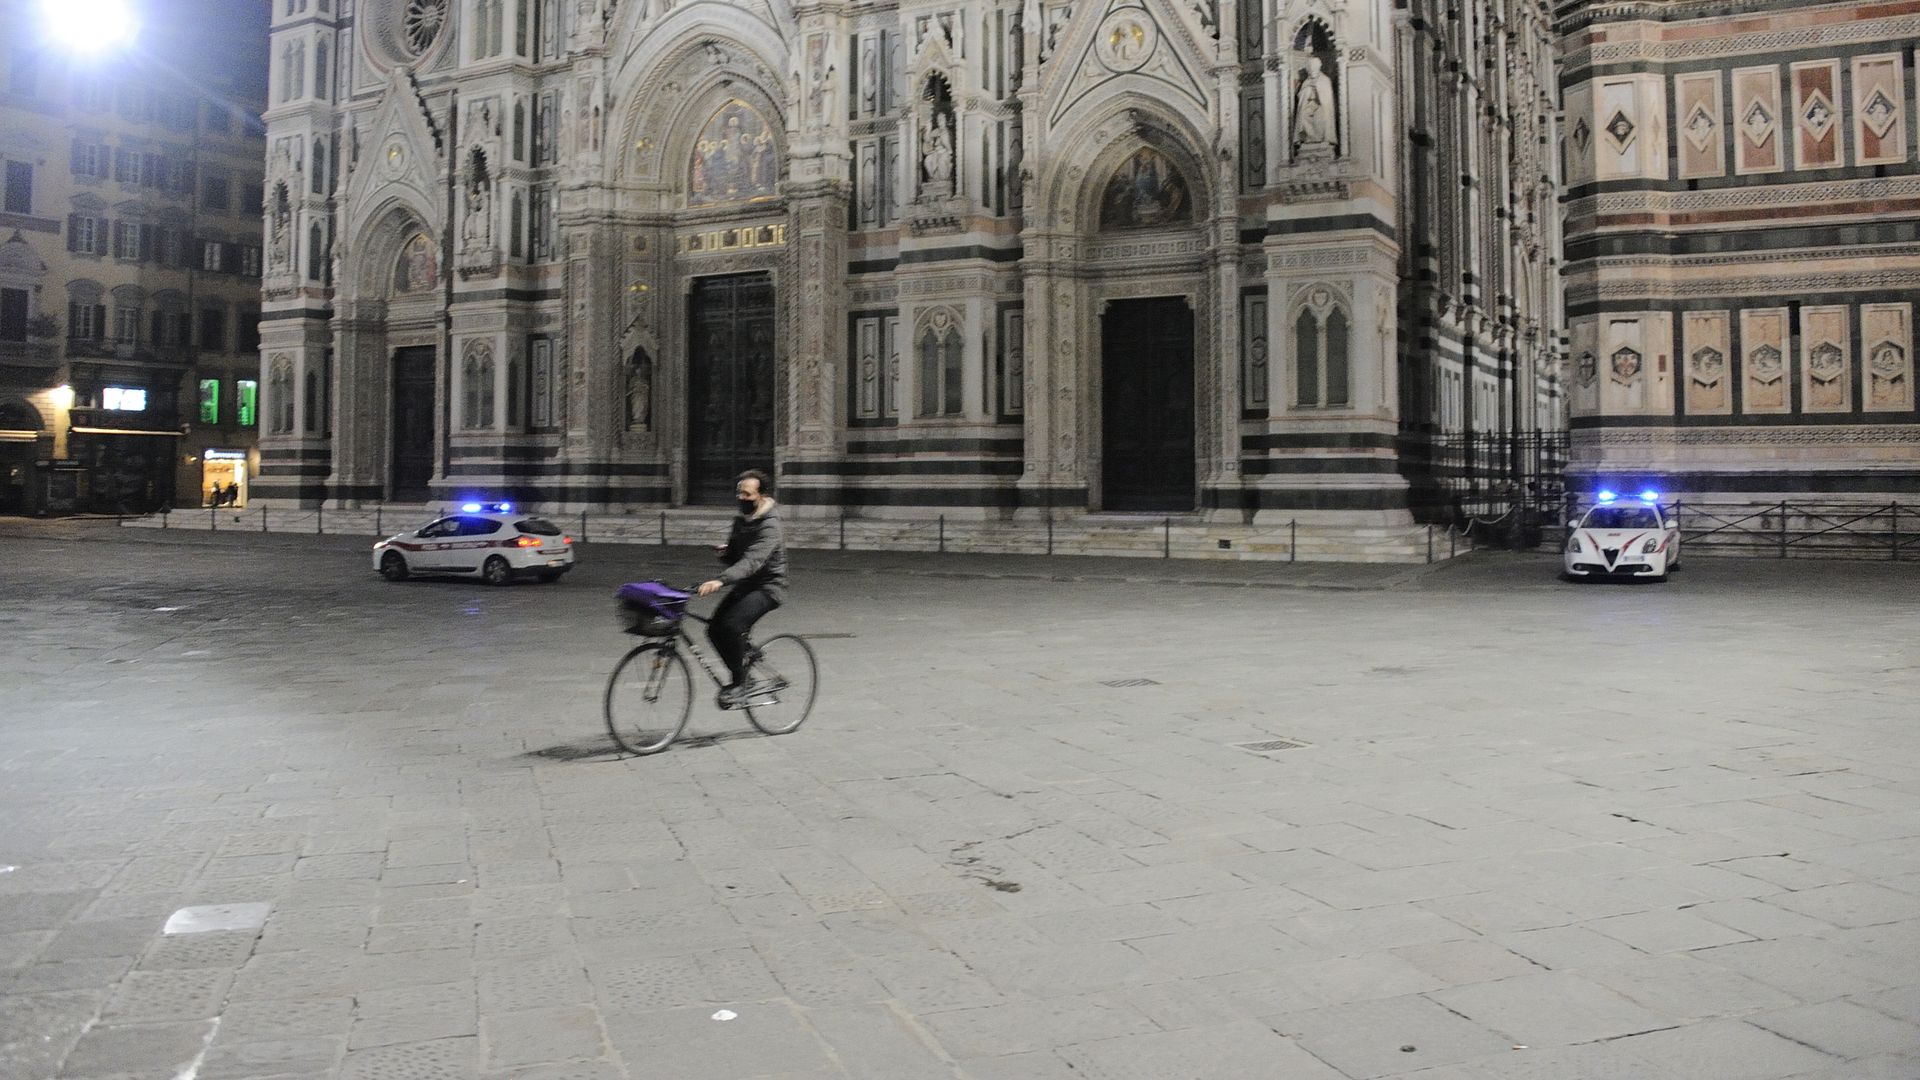  Duomo Square is seen empty on November 6, 2020 in Florence, Italy. 